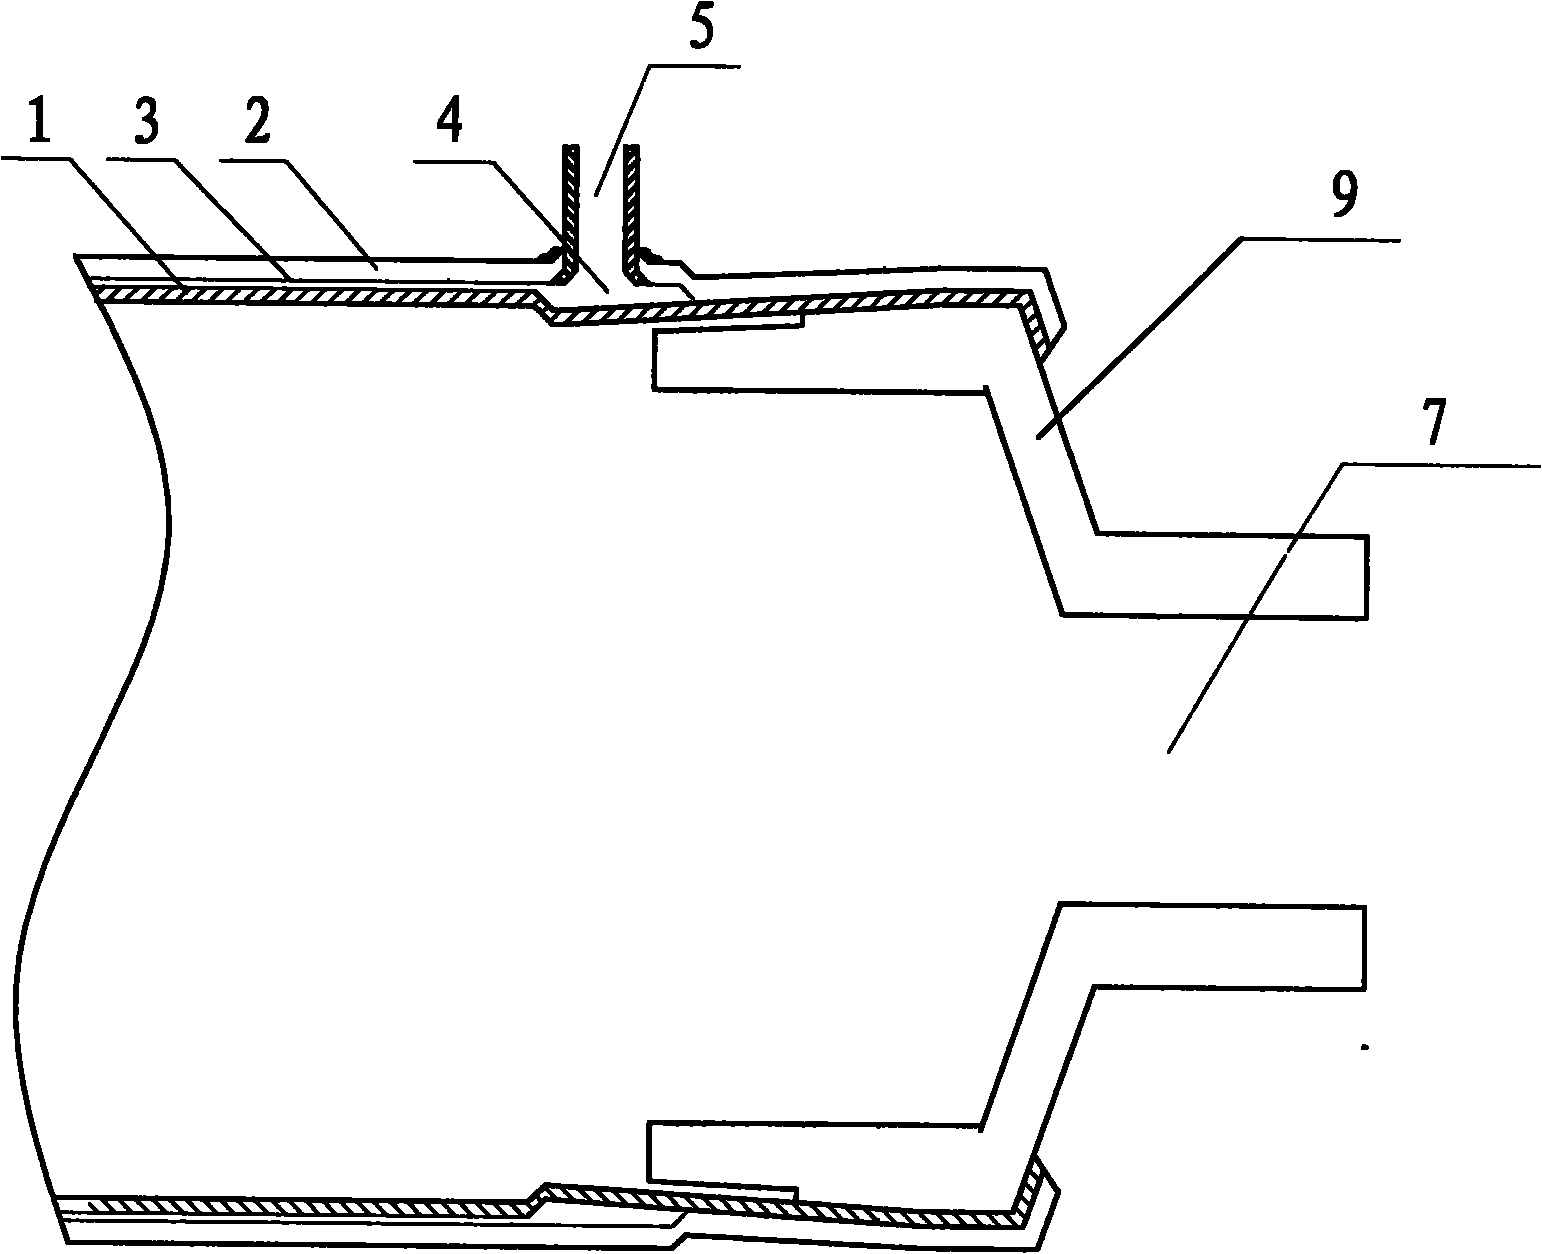 Telescopic connected high-efficiency dual-purpose water tank